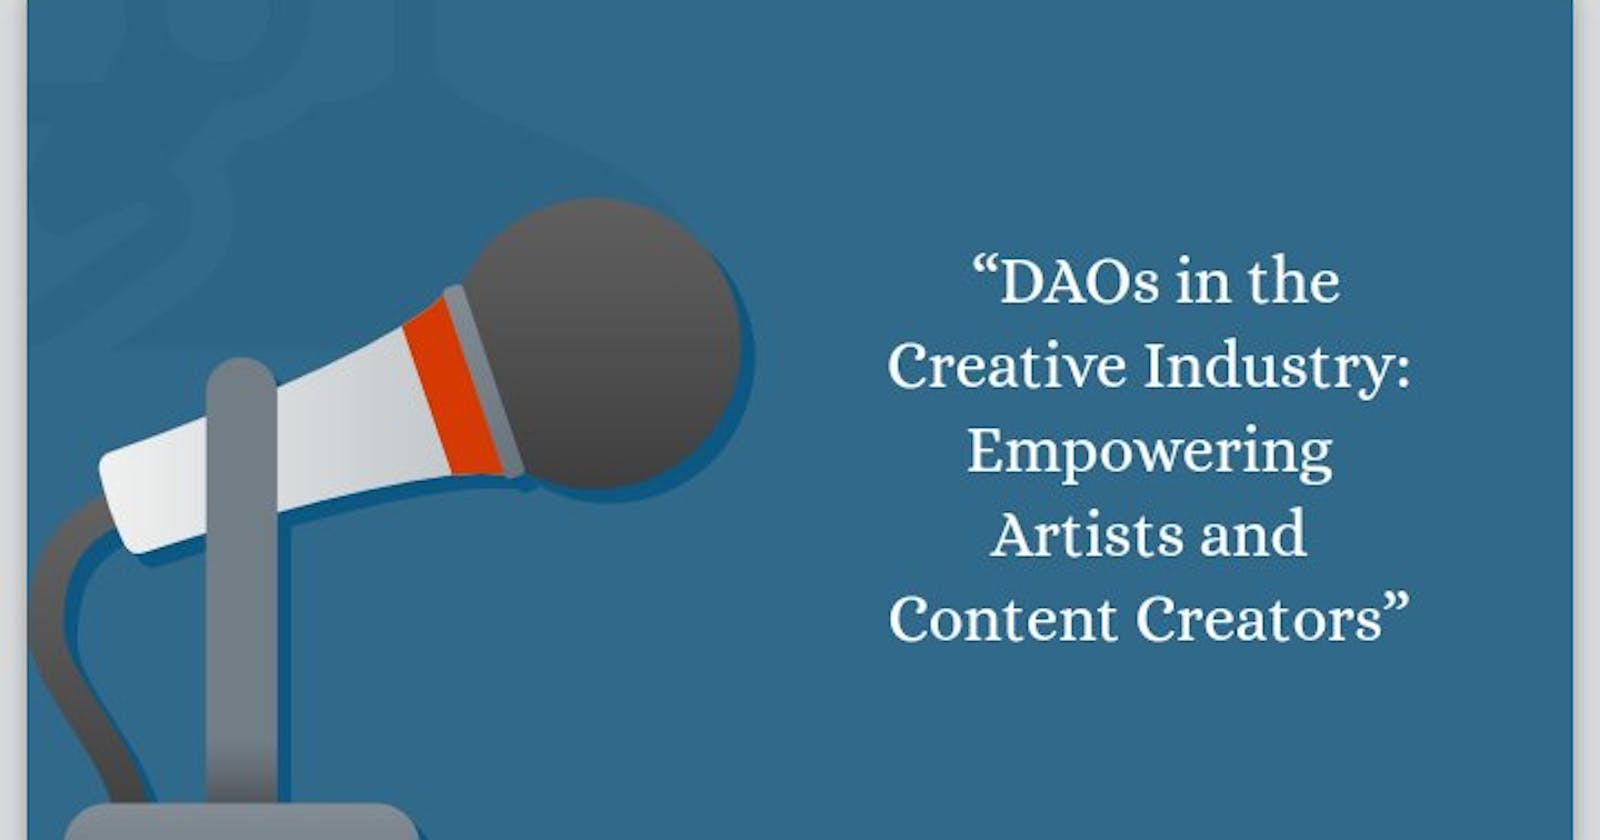 DAOs in the Creative Industry: Empowering Artists and Content Creators